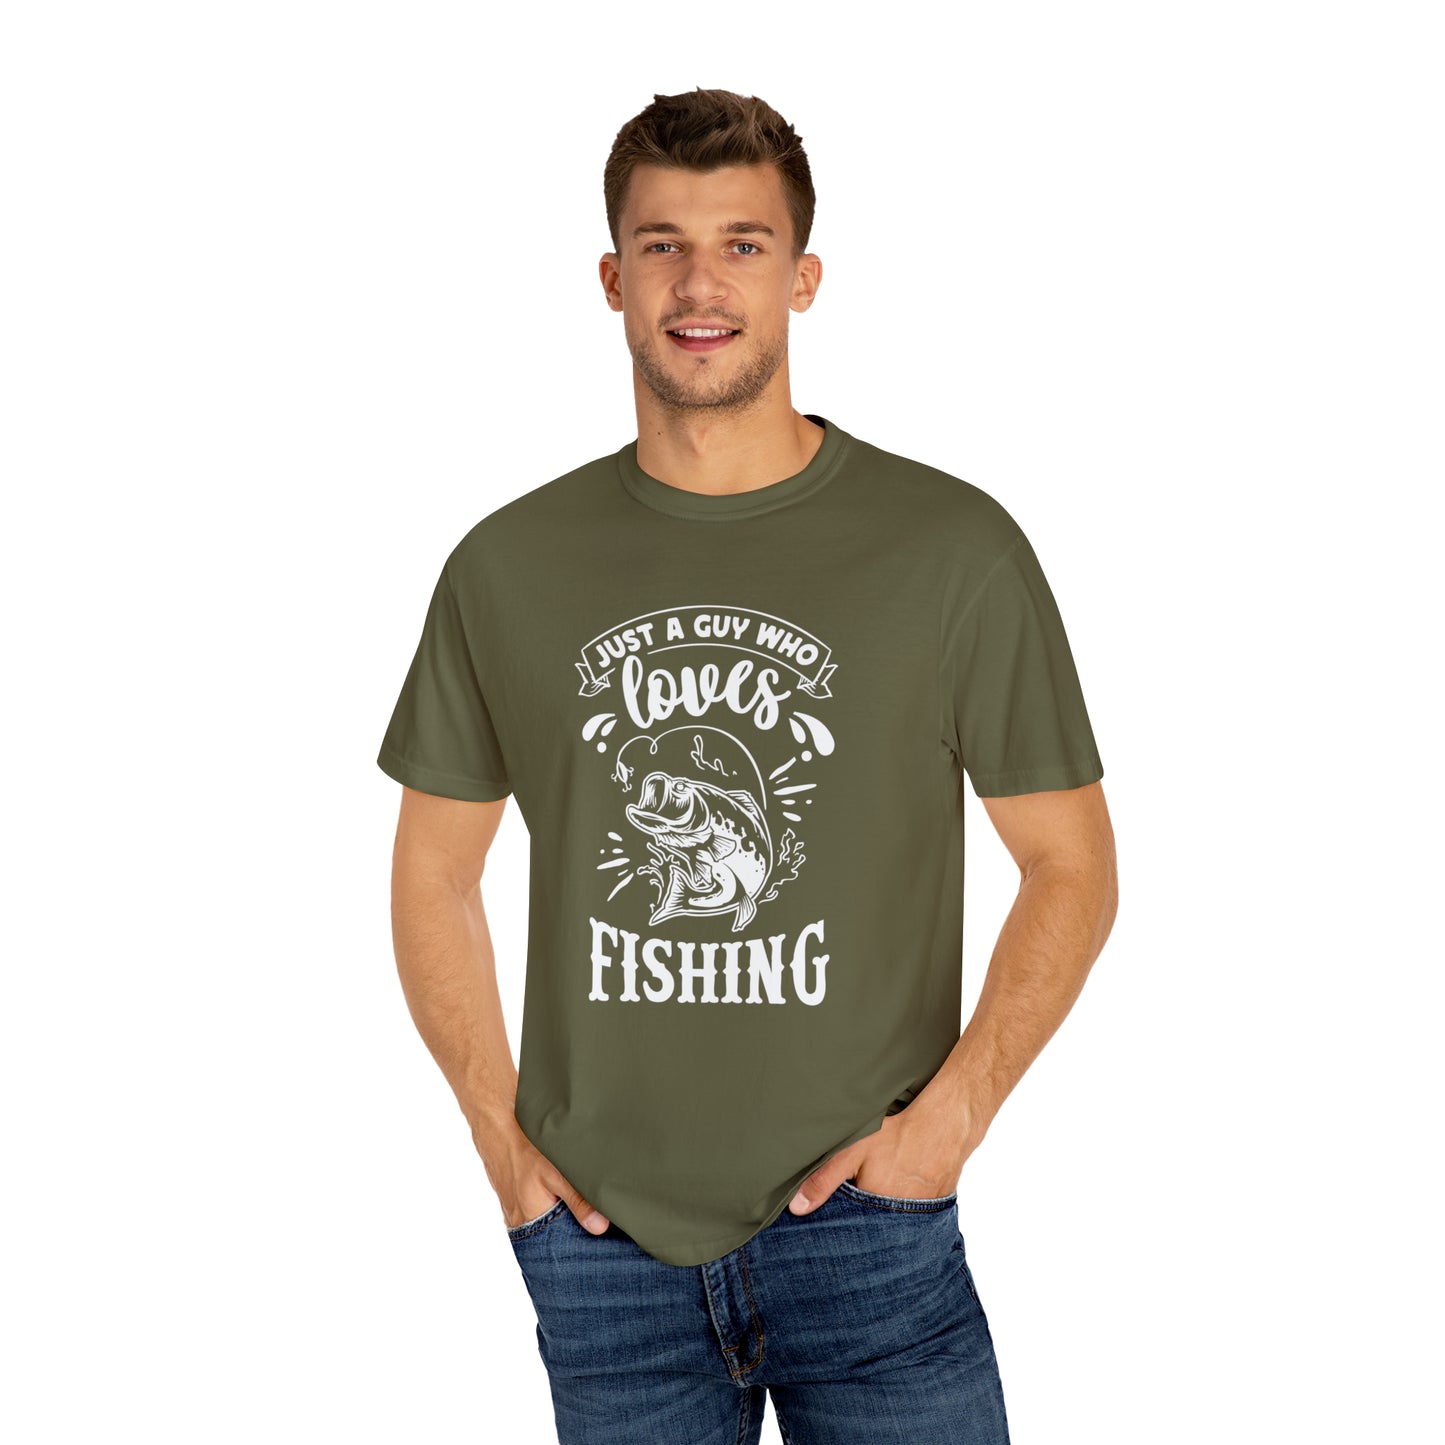 Passionate Angler: Express Your Love for Fishing with Style - T-Shirt